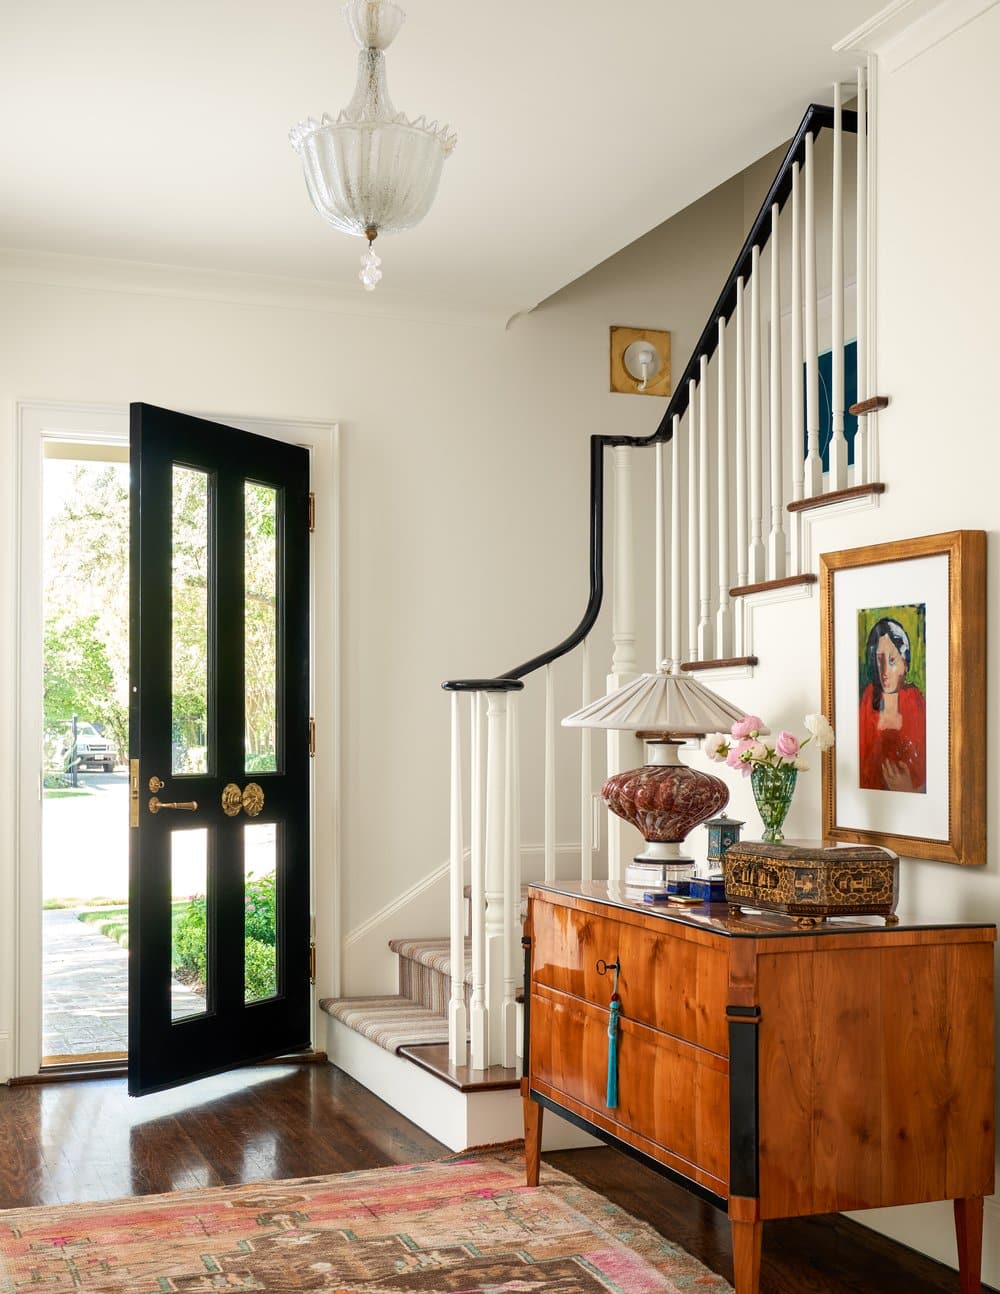 Jenkins Interiors, Nathan Schroder Photography, Fabulous in Fort Worth